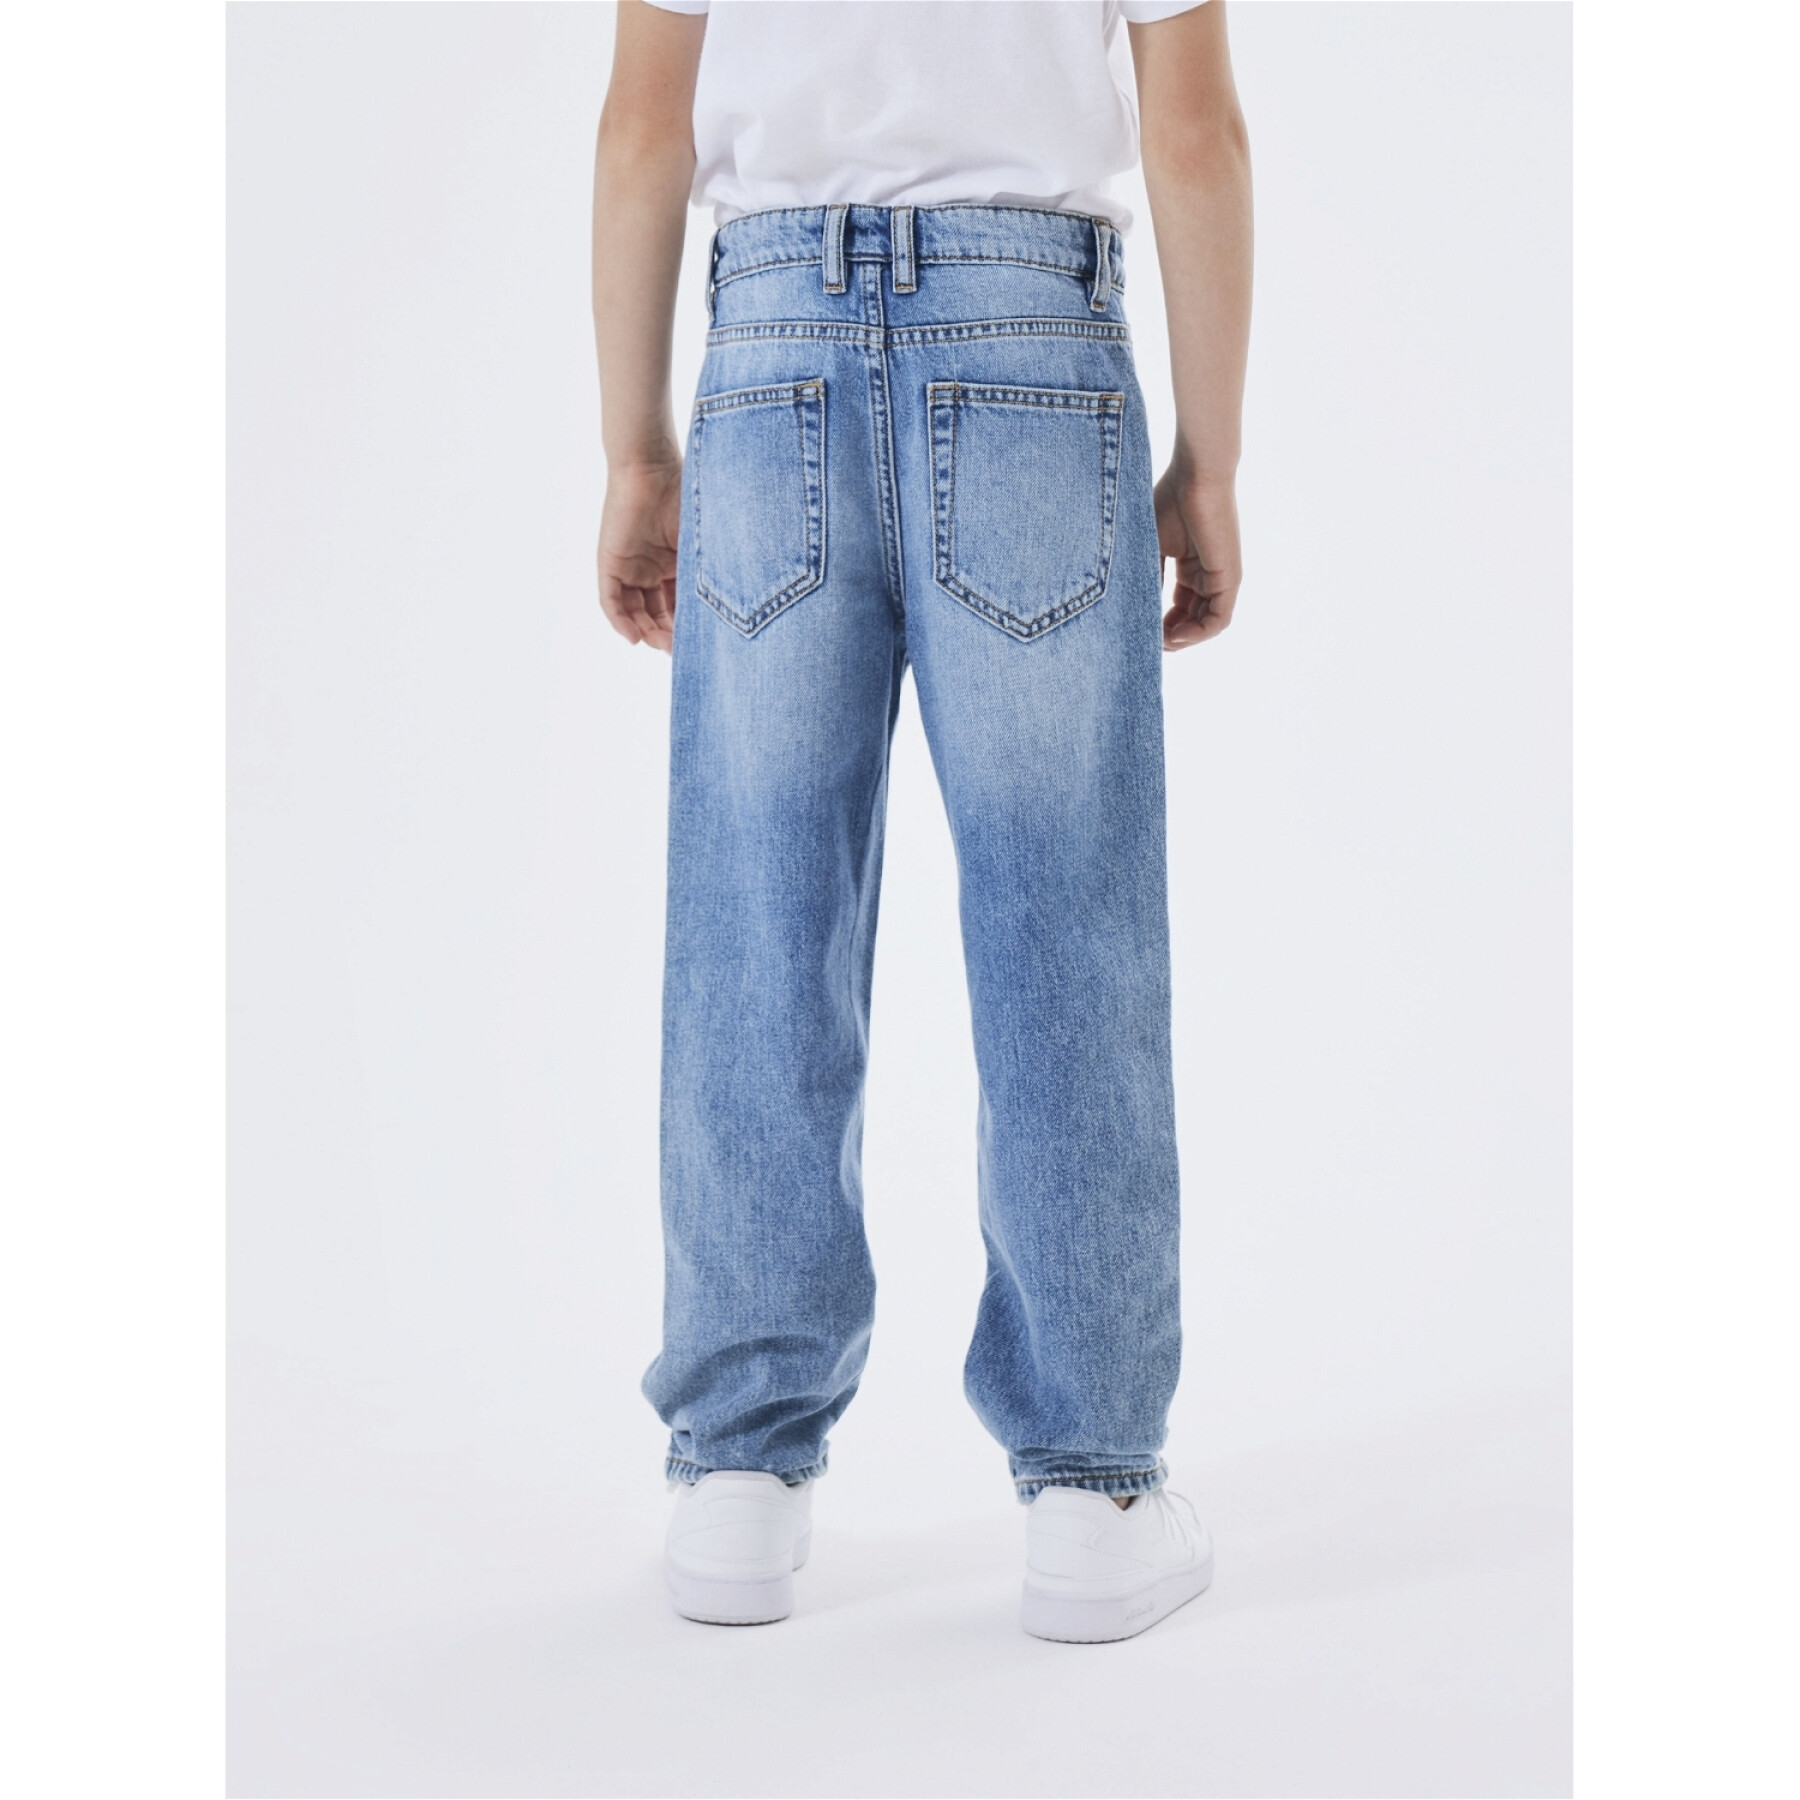 Children's straight jeans Name it Ryan 3418-BE